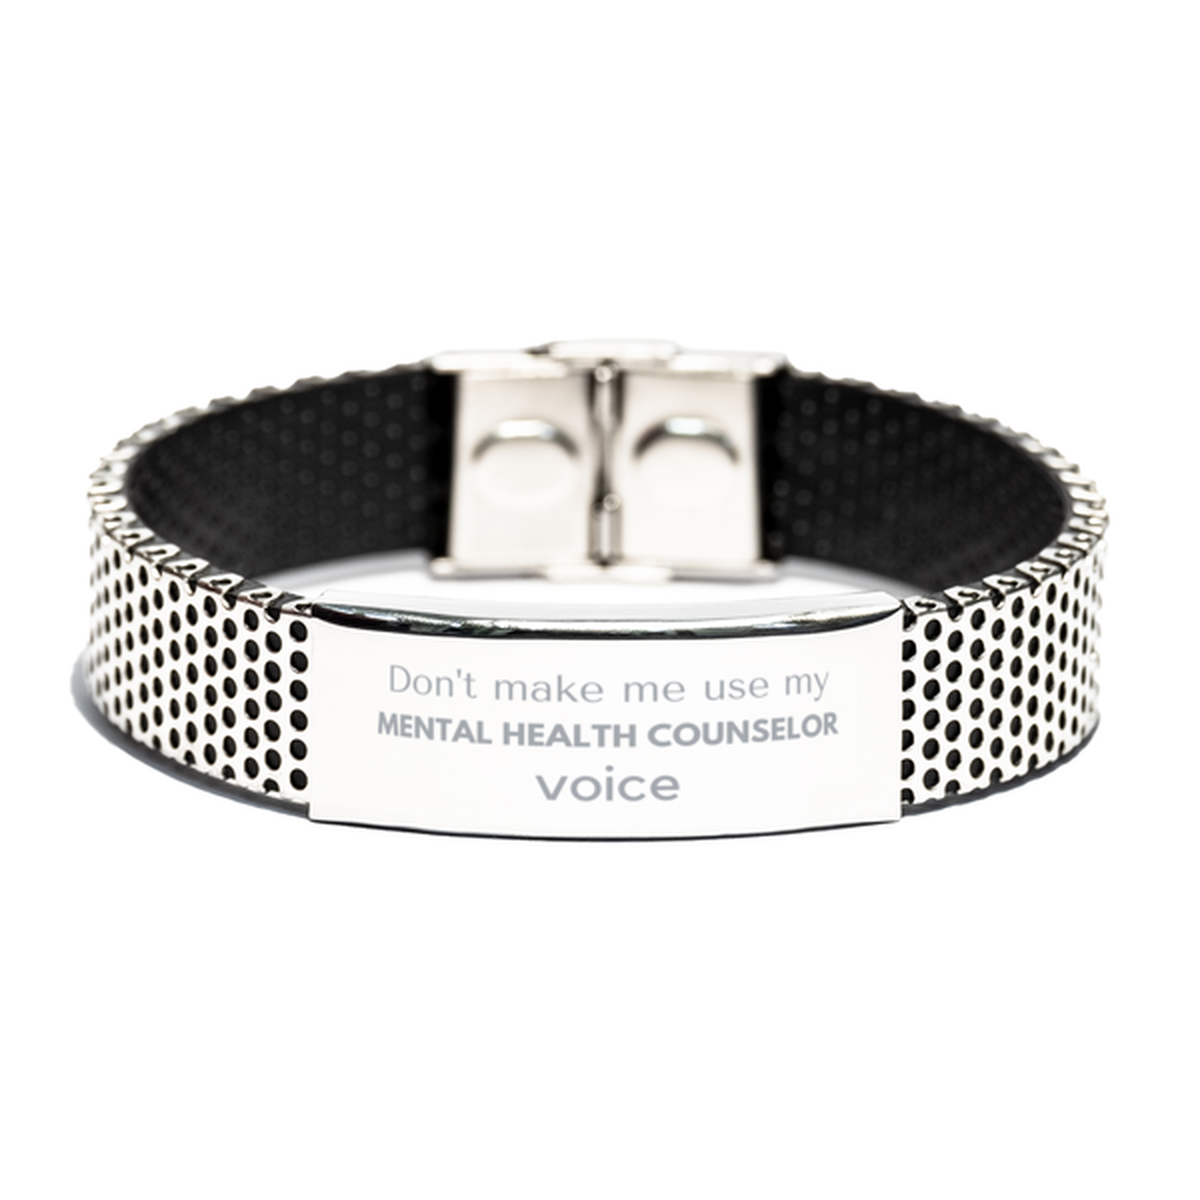 Don't make me use my Mental Health Counselor voice, Sarcasm Mental Health Counselor Gifts, Christmas Mental Health Counselor Stainless Steel Bracelet Birthday Unique Gifts For Mental Health Counselor Coworkers, Men, Women, Colleague, Friends